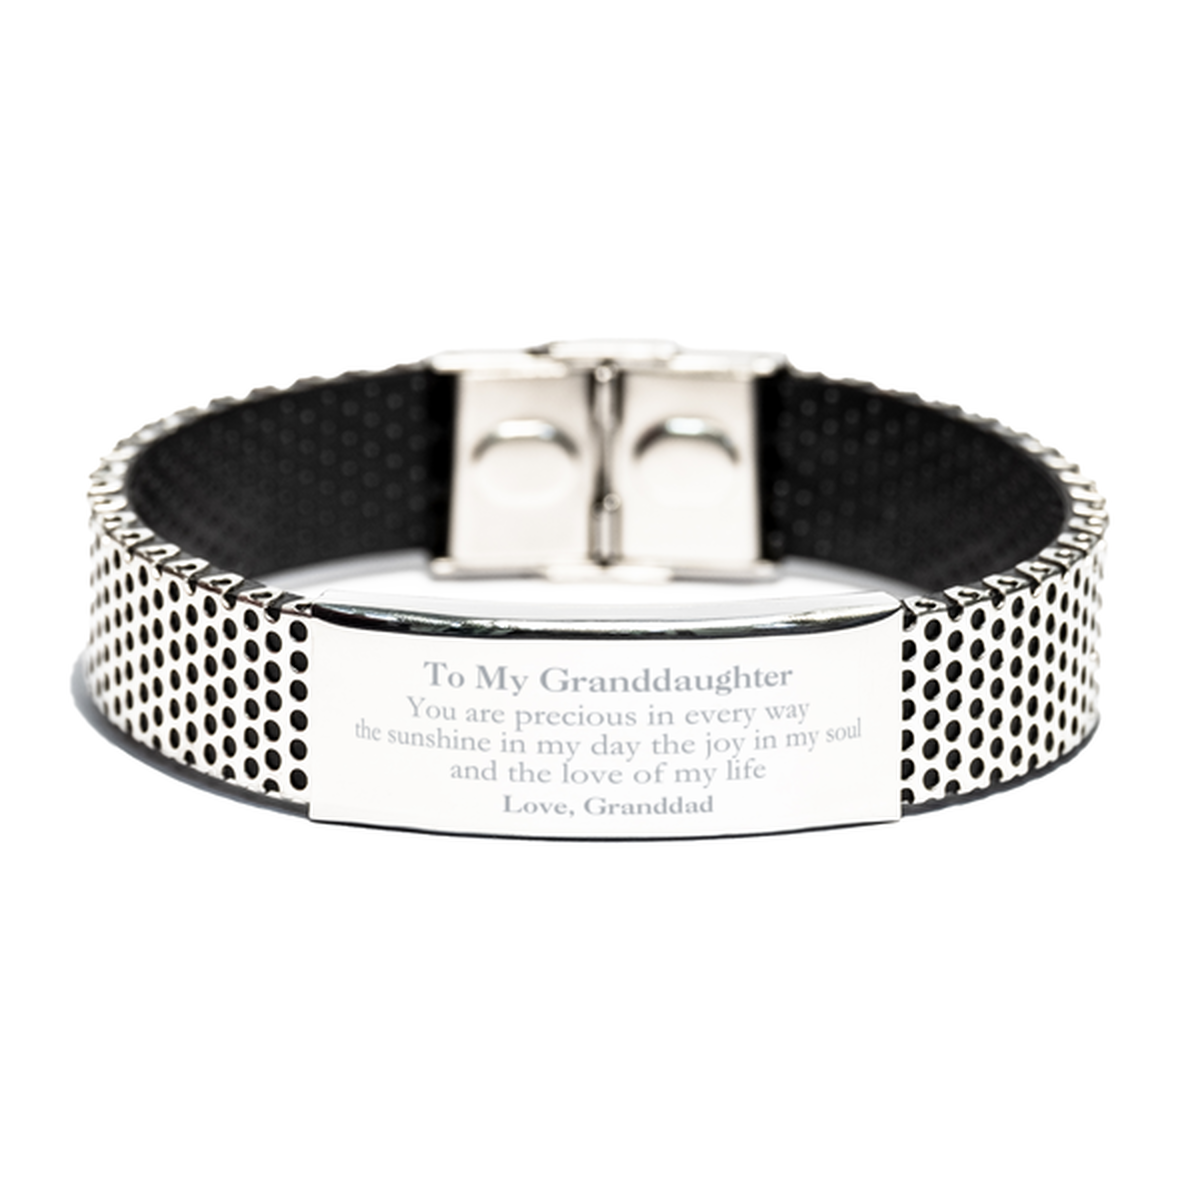 Graduation Gifts for Granddaughter Stainless Steel Bracelet Present from Granddad, Christmas Granddaughter Birthday Gifts Granddaughter You are precious in every way the sunshine in my day. Love, Granddad